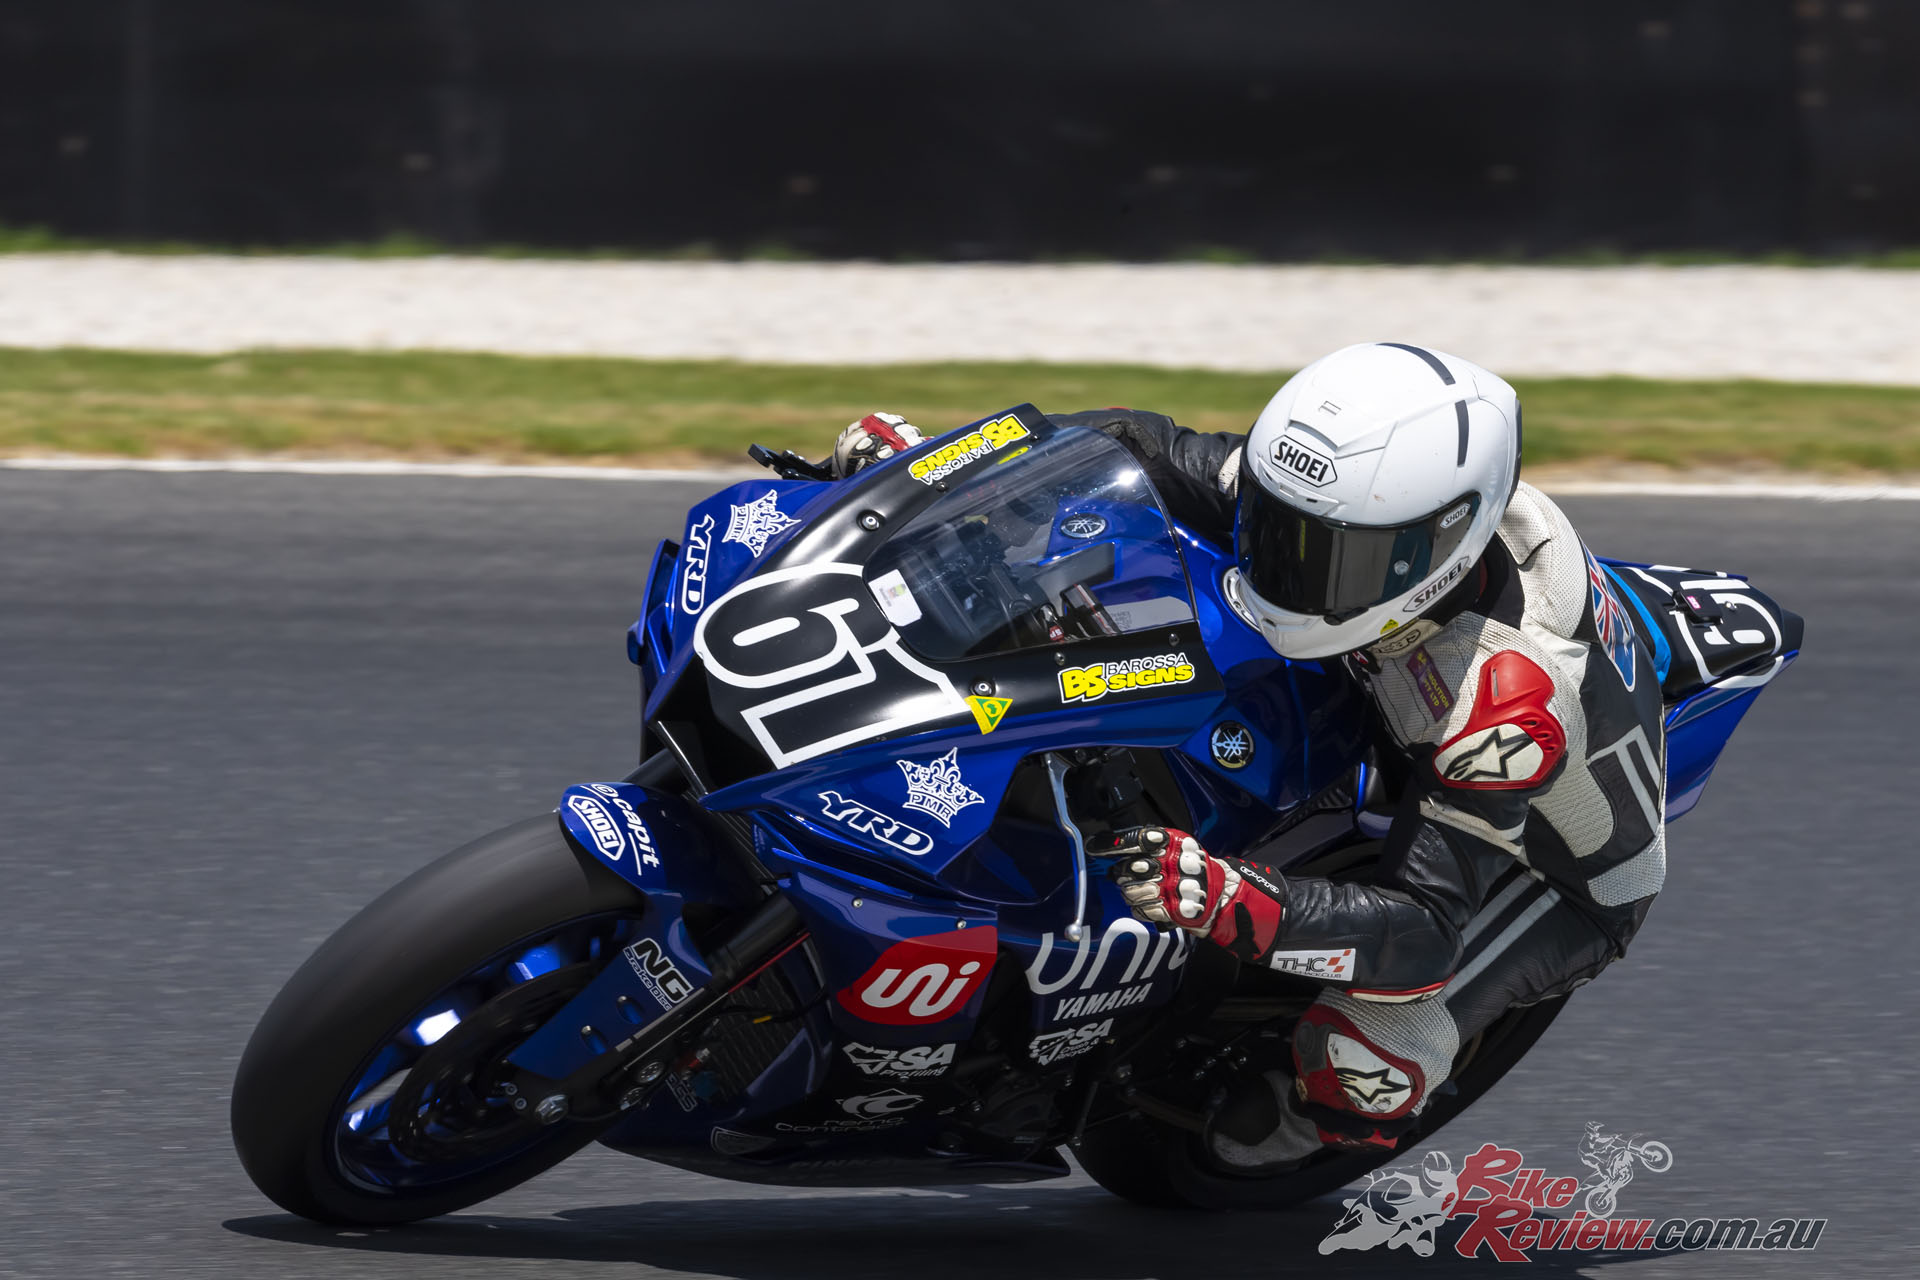 The Supersport field were scrambling to tumble Oli's time as he gets some practice in before heading overseas to race in the World Supersport Championship!